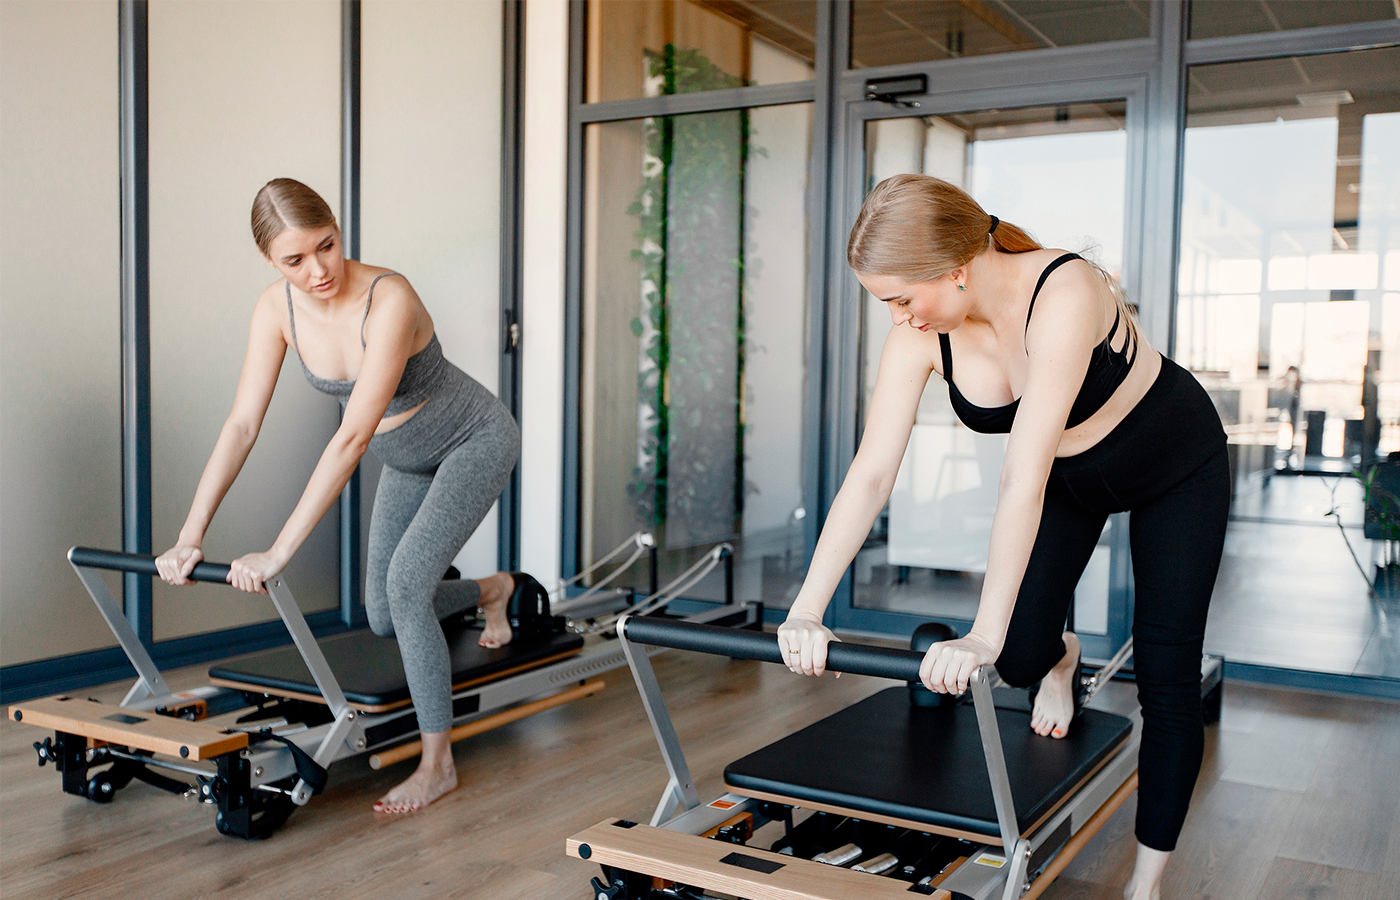 A family workout using Pilates reformers